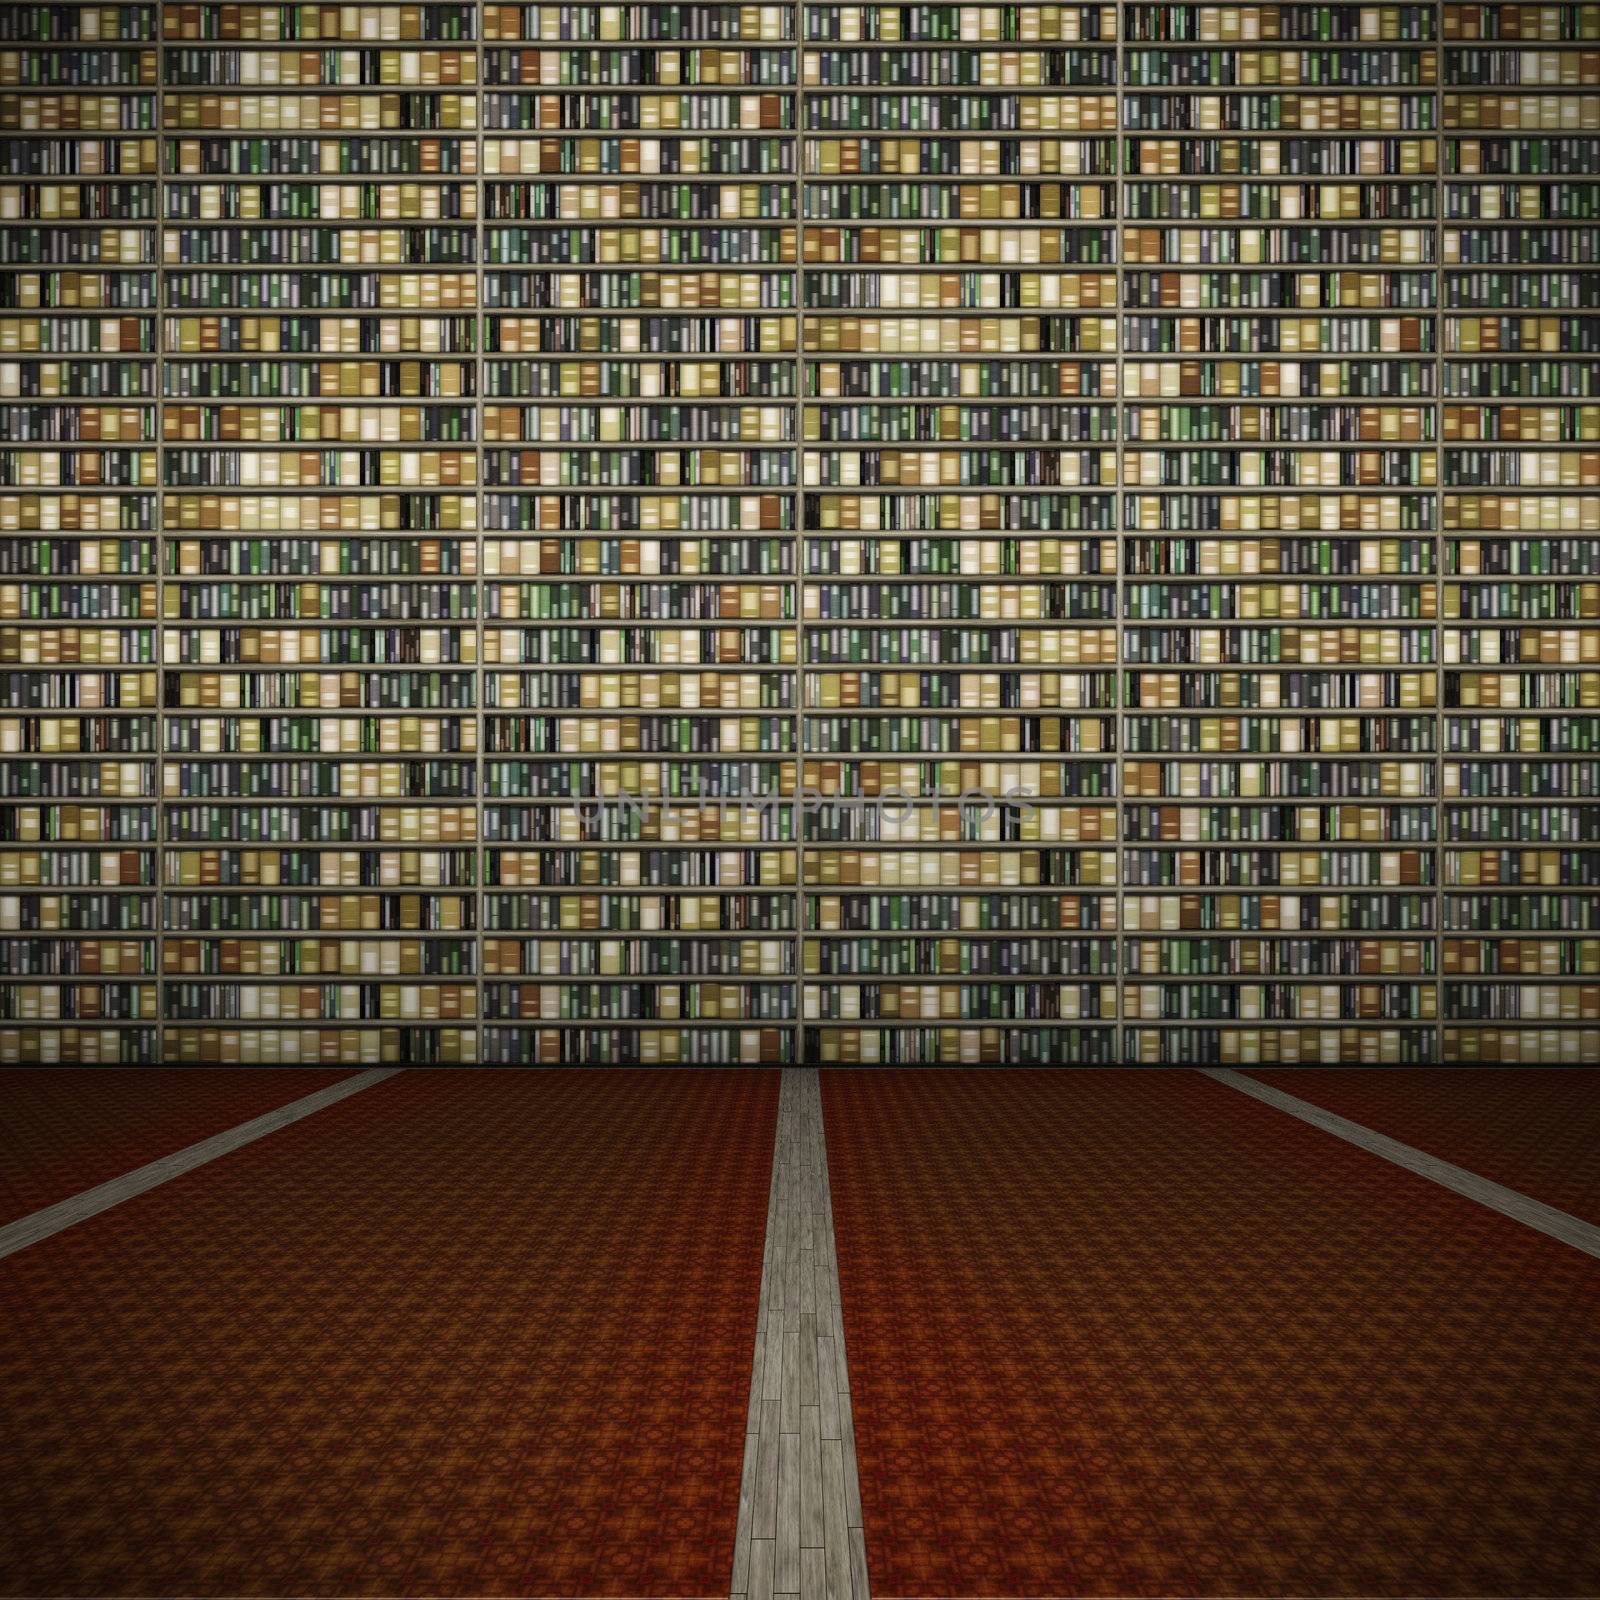 An image of a nice library background